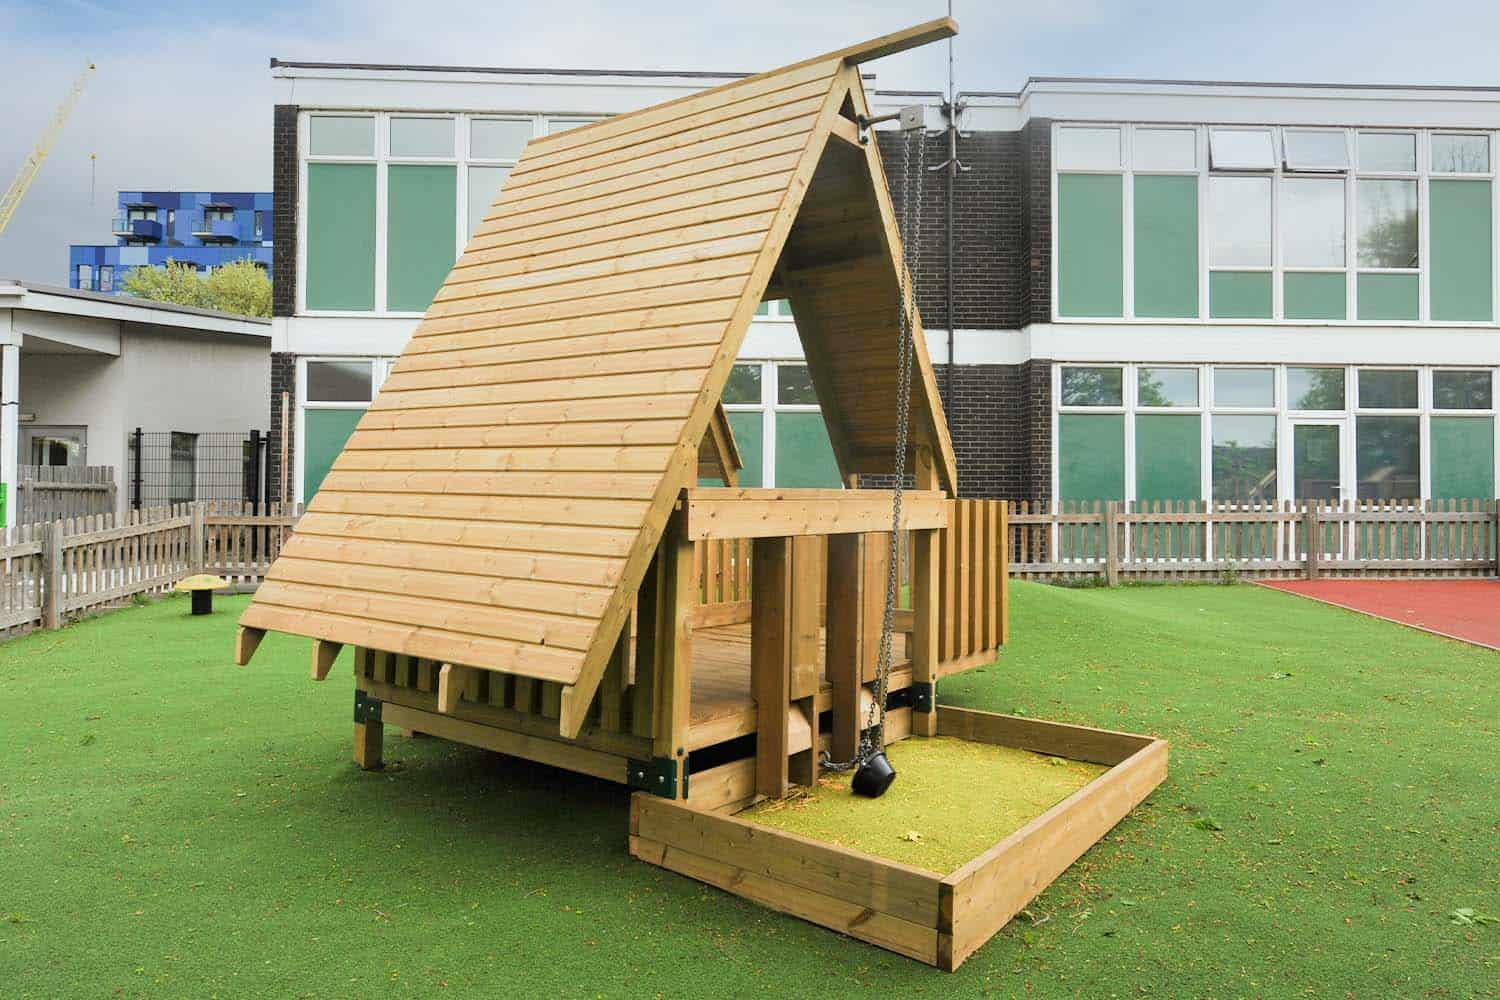 a wooden hut with a sand pit